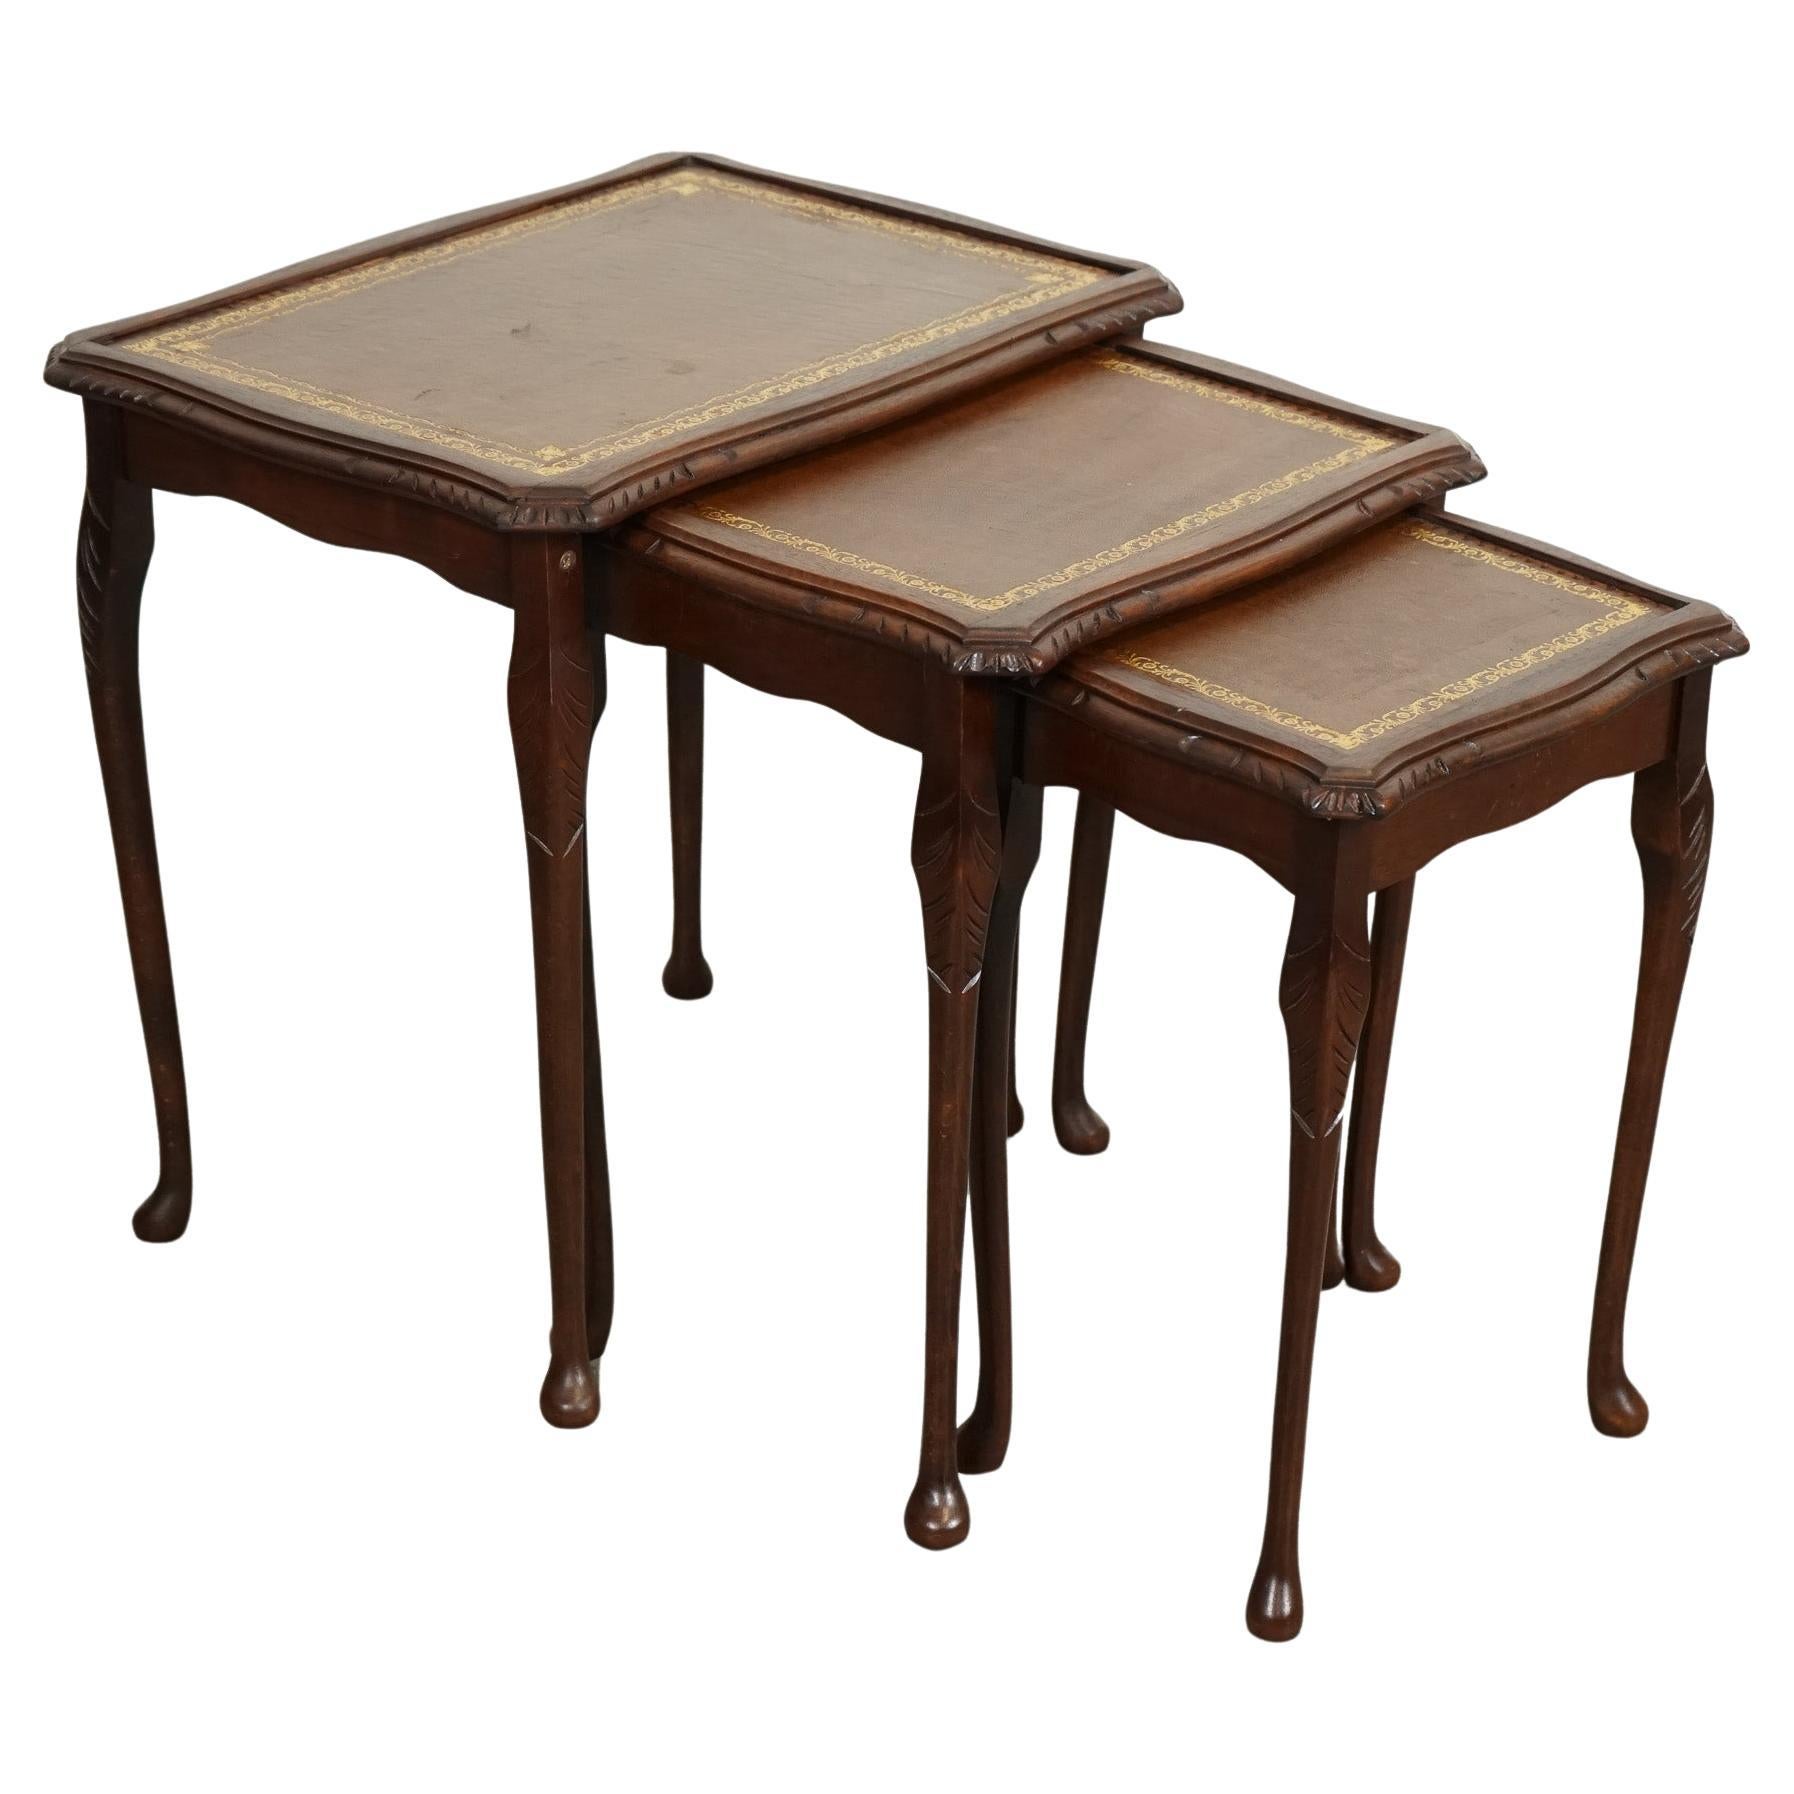 VINTAGE NEST OF TABLES QUEEN ANNE STYLE LEGS WiTH BROWN EMBOSsed LEATHER top en vente